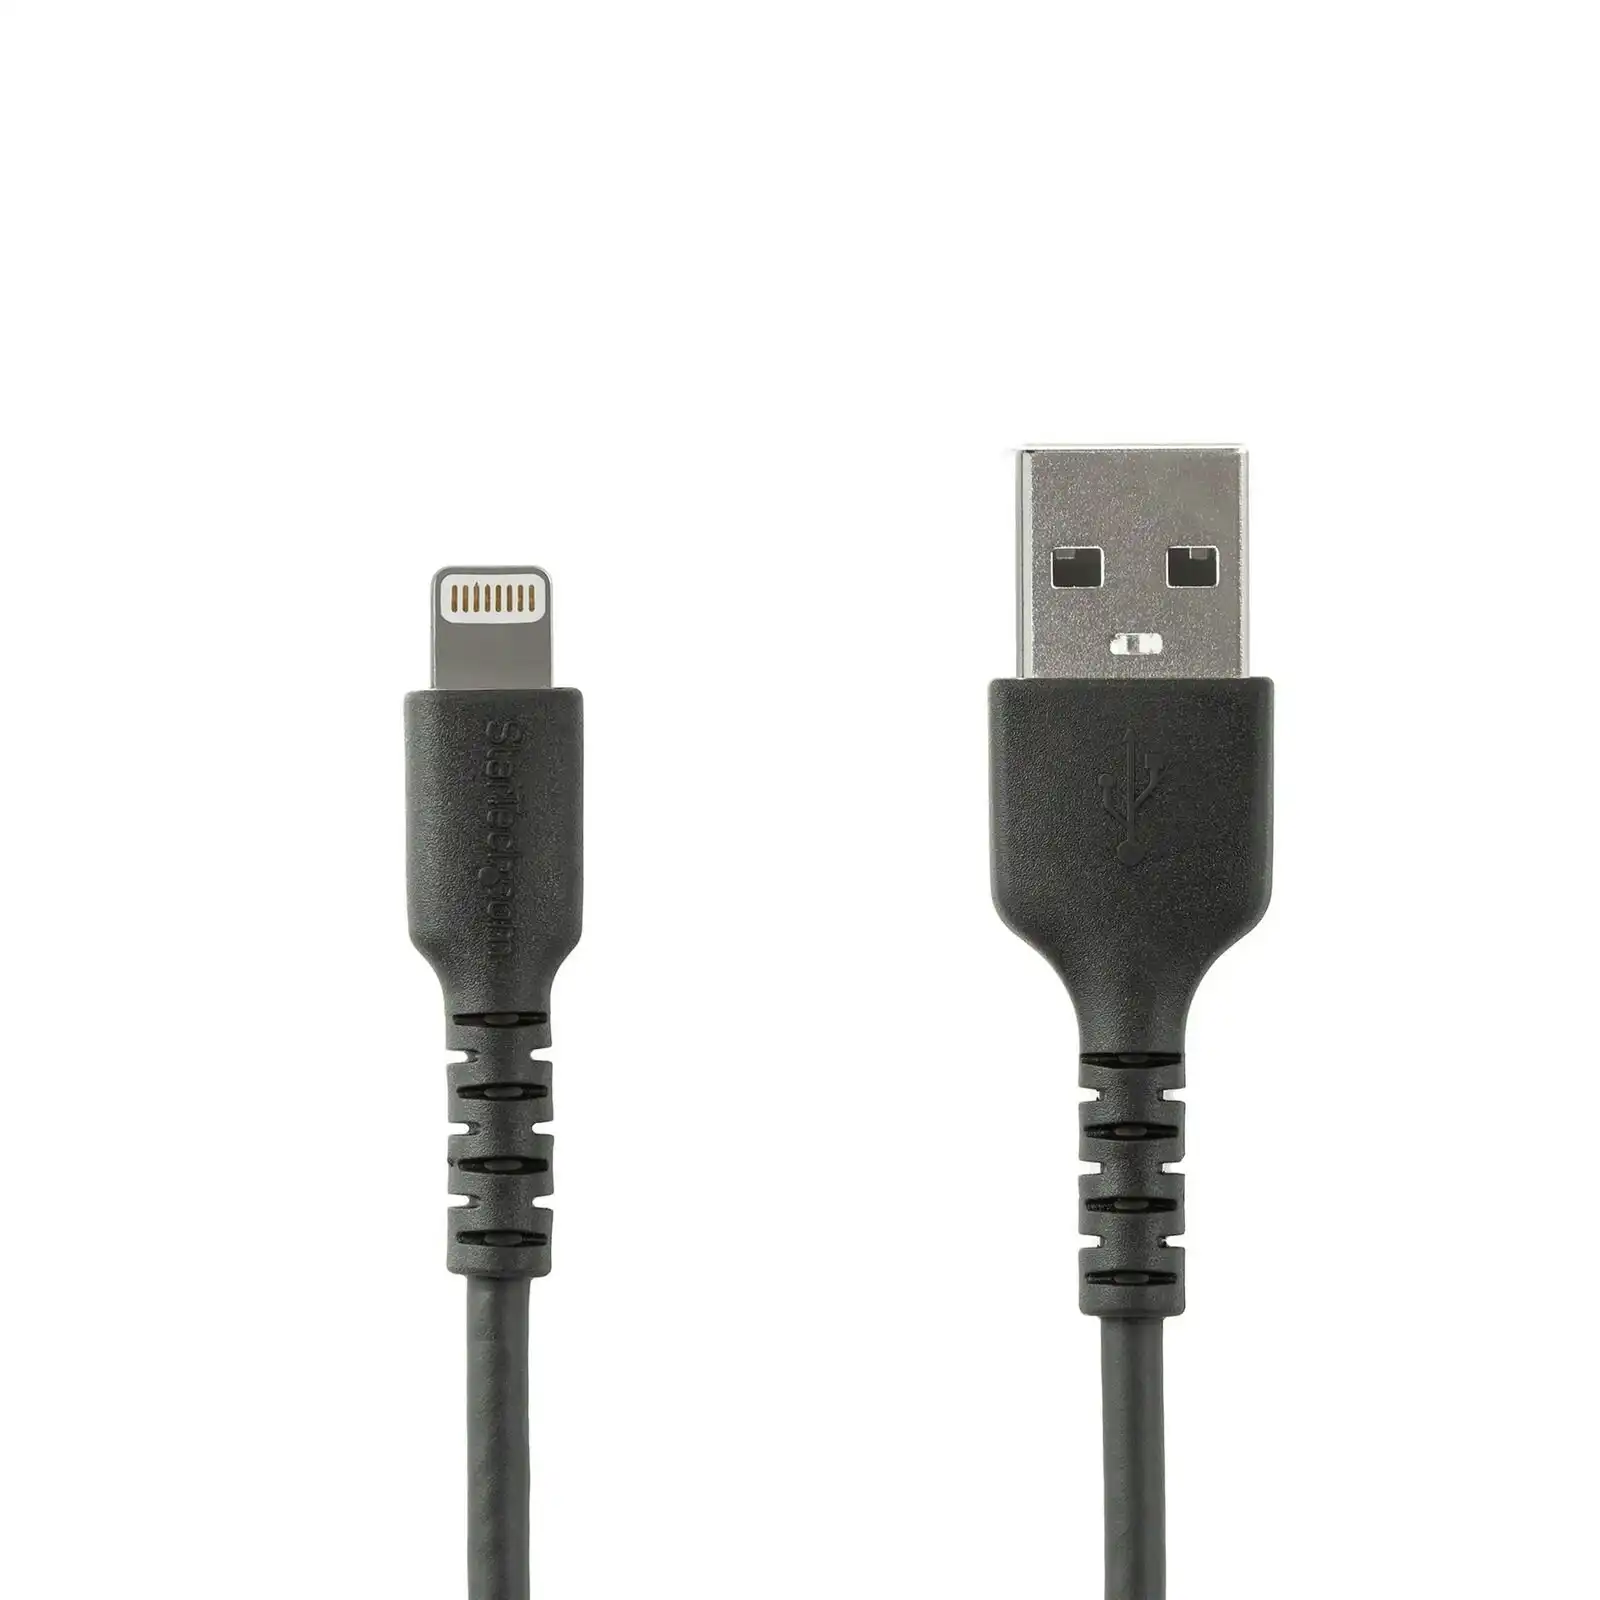 Star Tech 1m Slim Lightning To USB Charger/Sync Cable For iPhone/iPod/iPad BLK